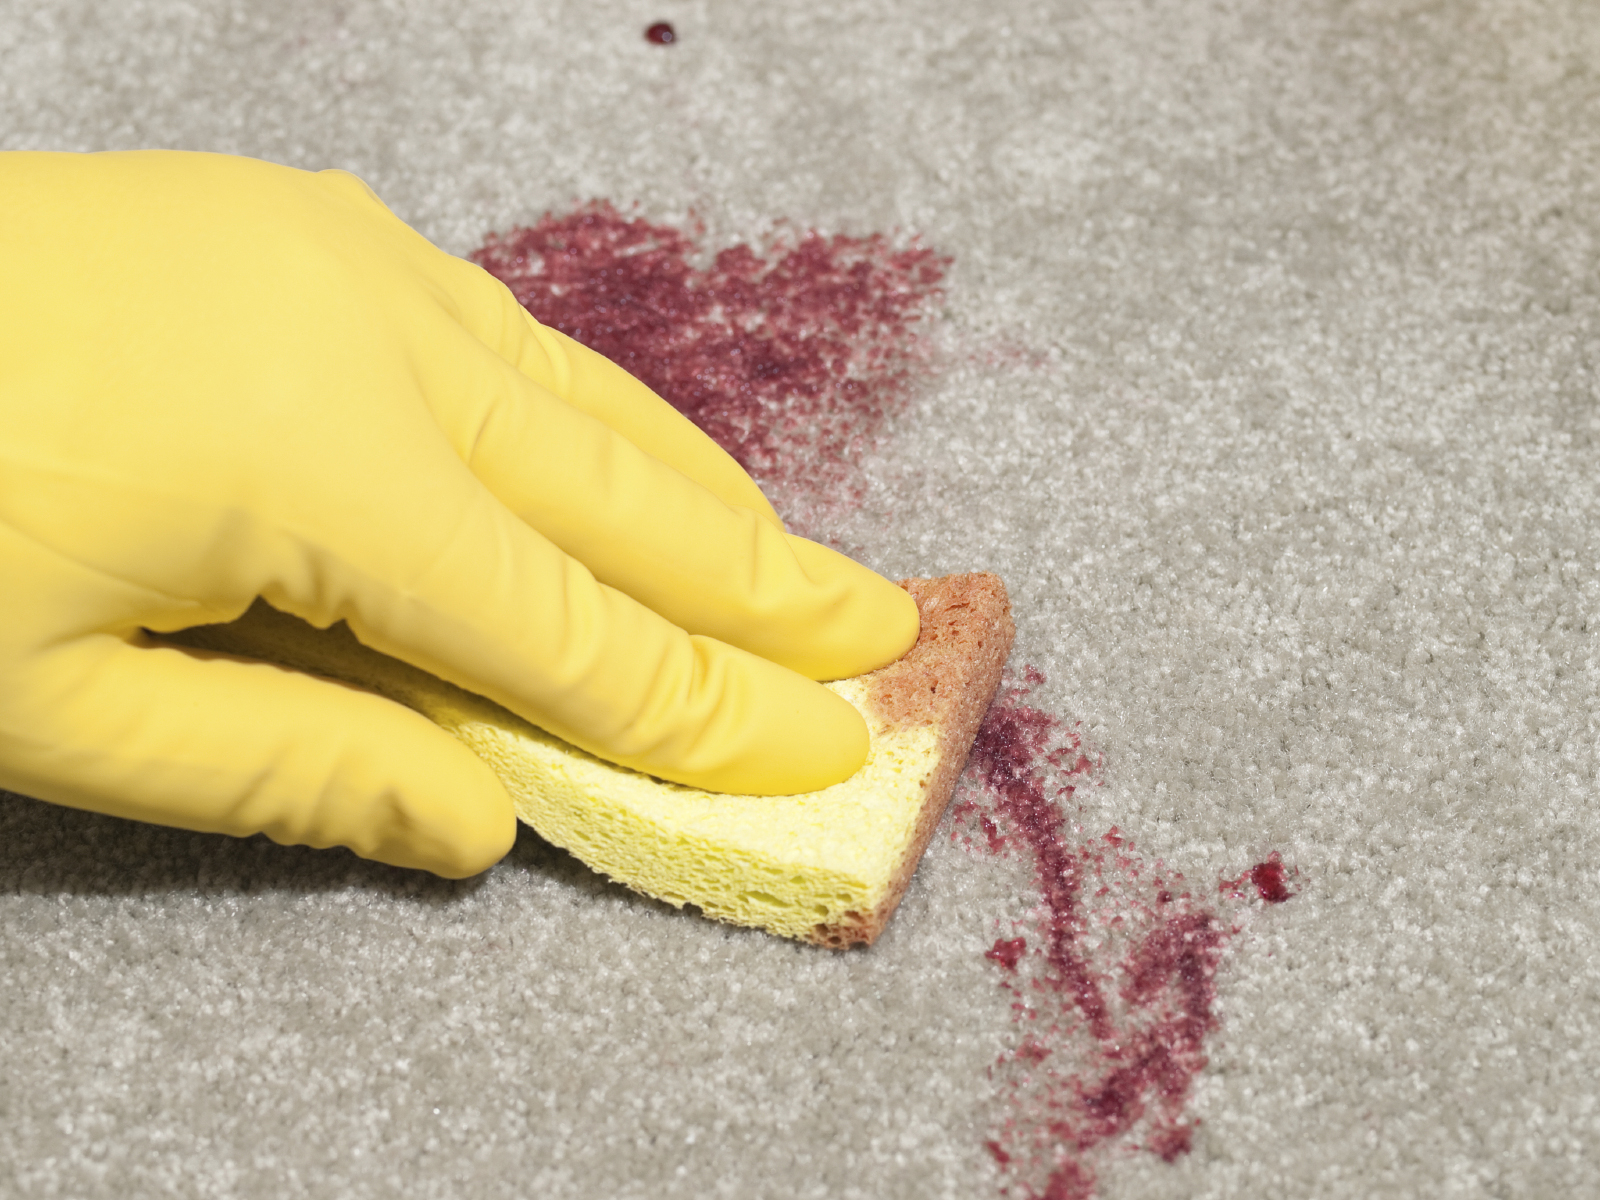 Blood spill biohazard on carpet being cleaned.